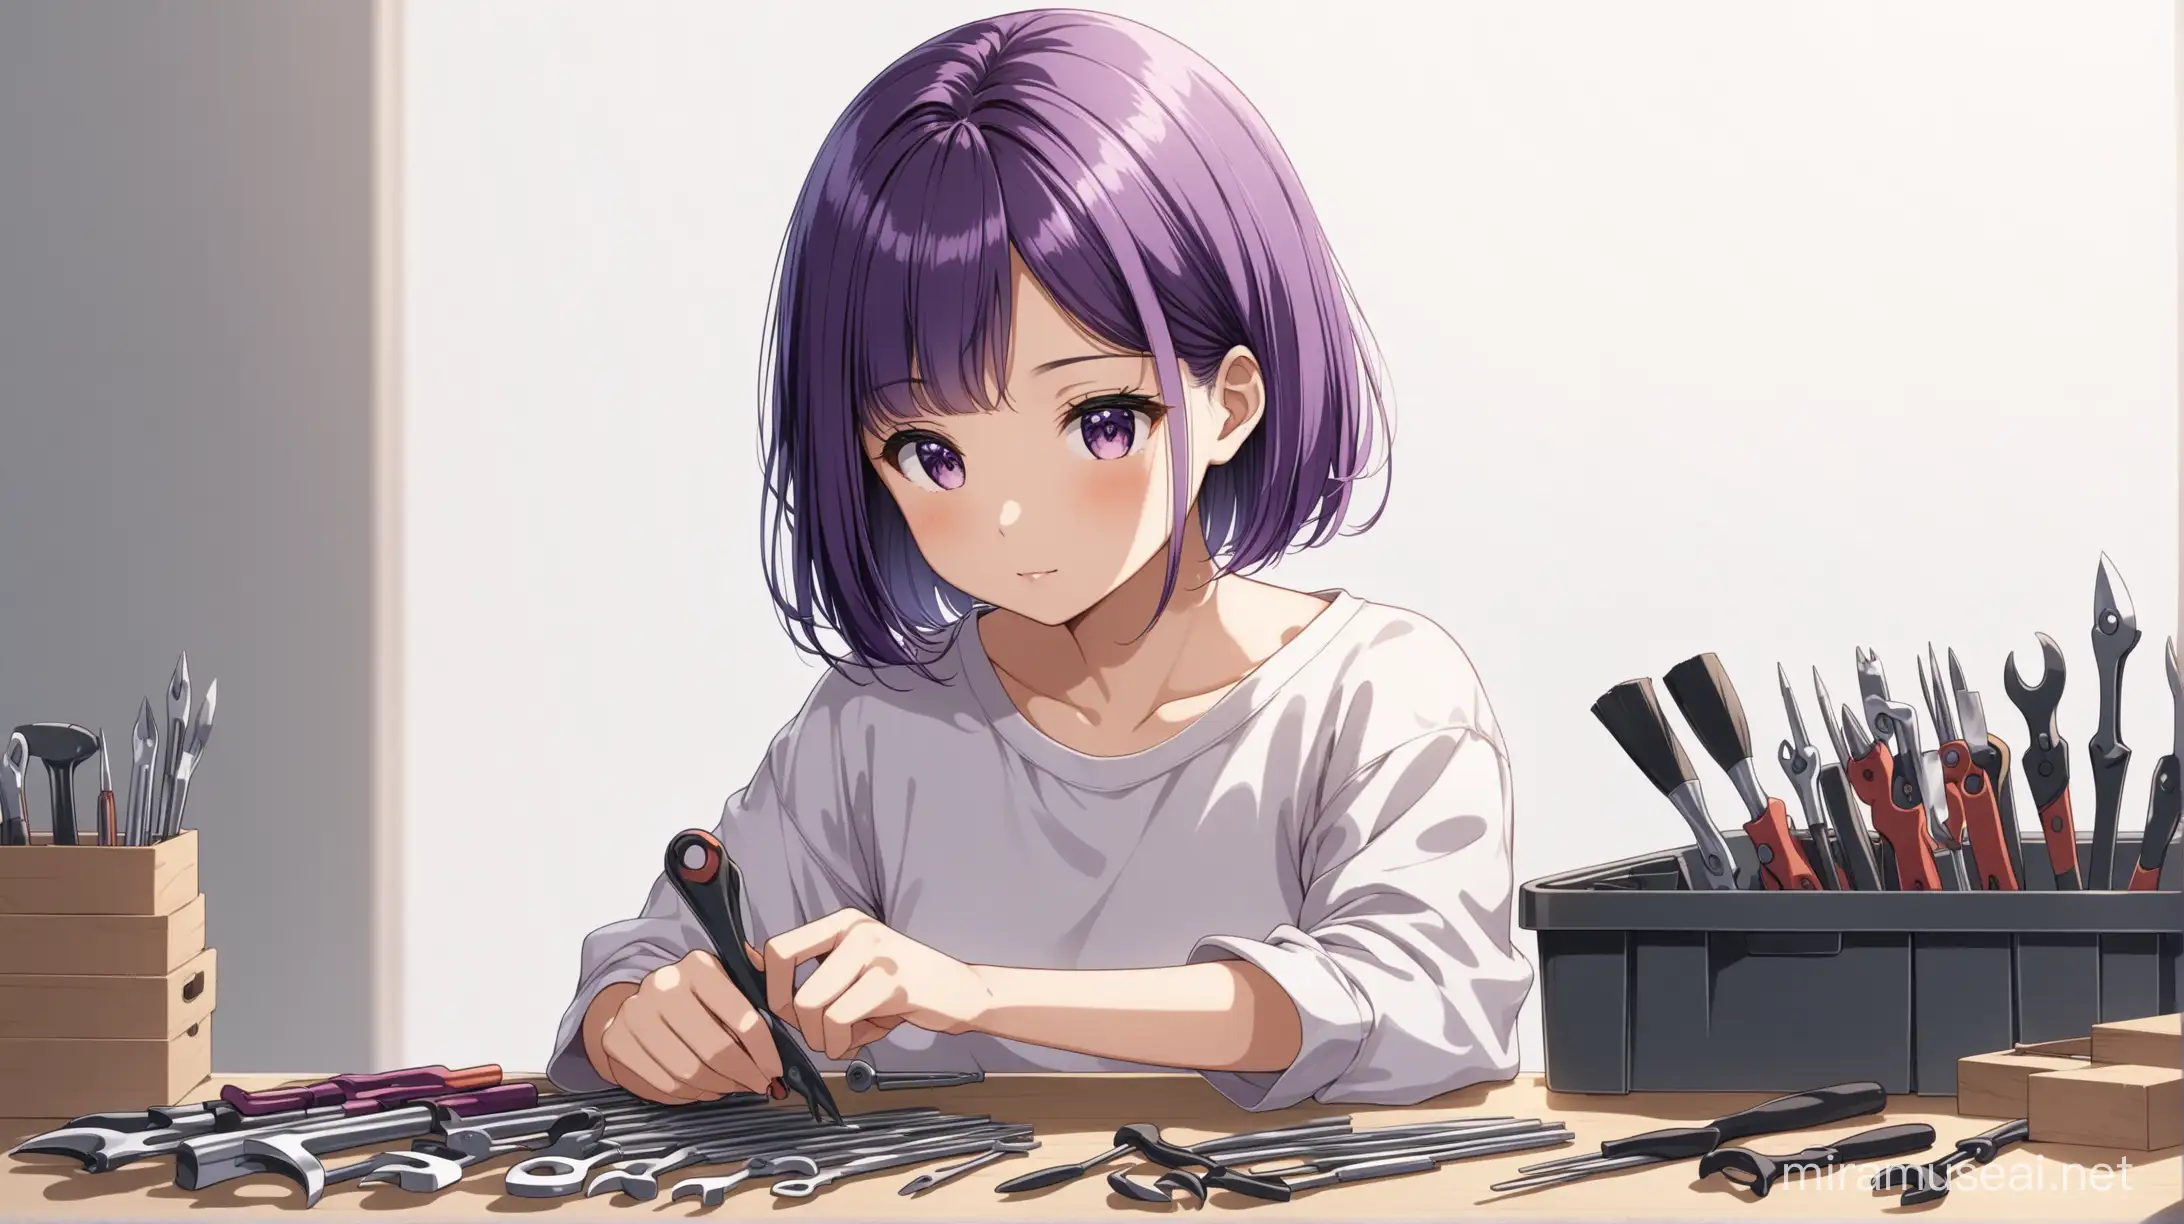 Asian Girl Sorting Tools with Purple Bob Hairstyle on White Background Anime 4K Image